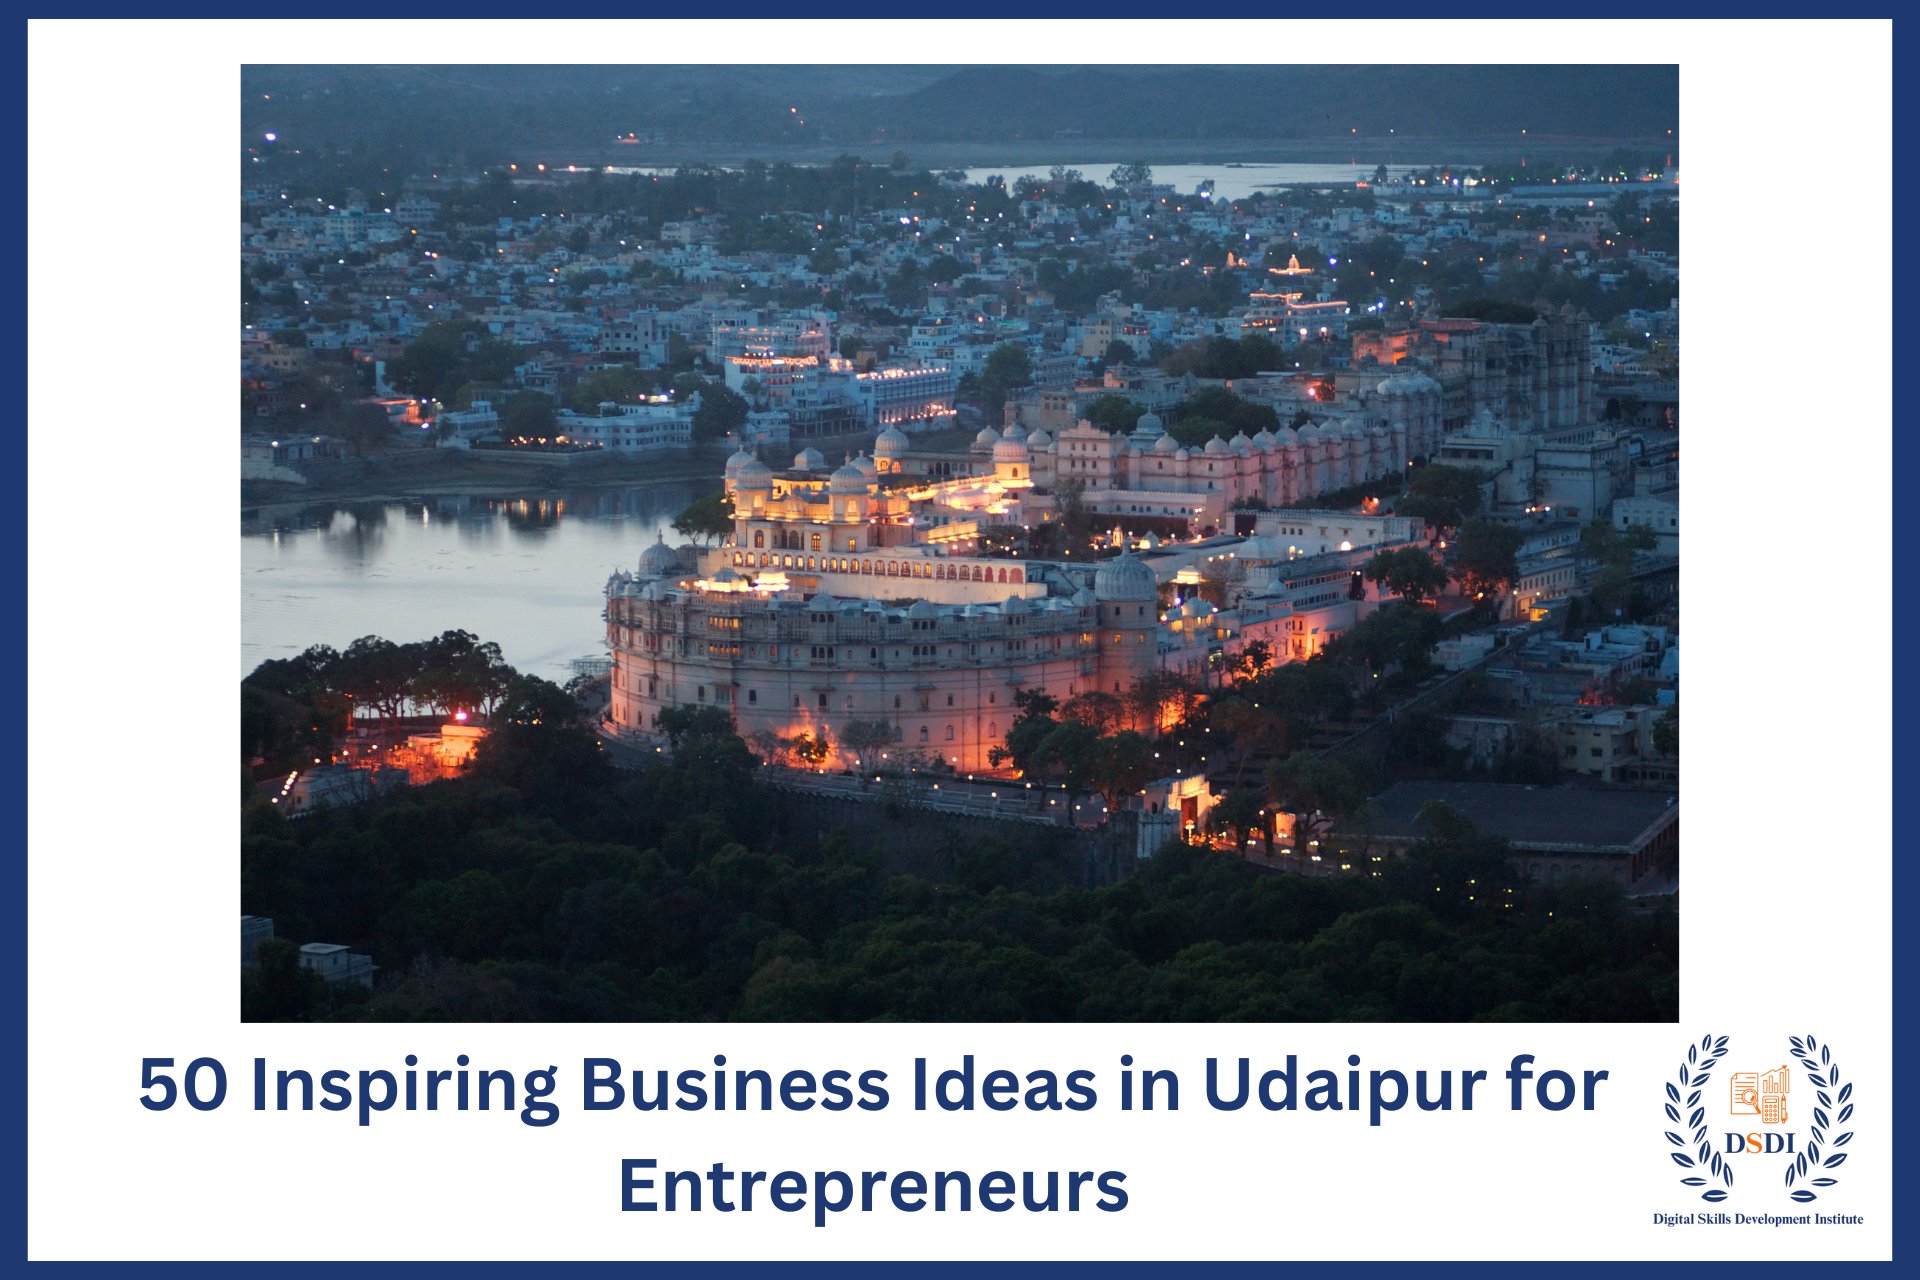 Business Ideas in Udaipur